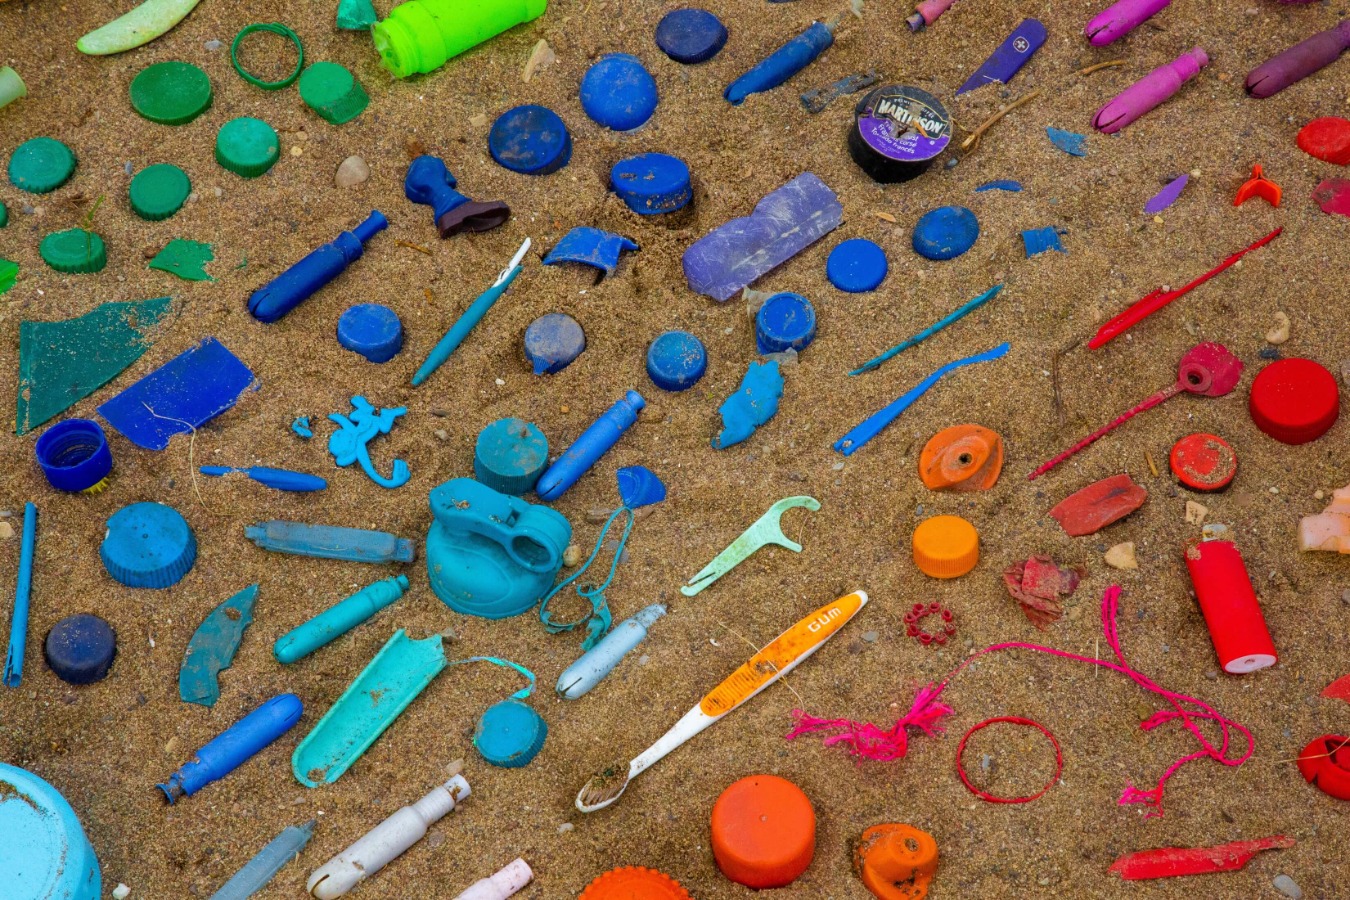 Plastic beach pollution: plastic caps, toothbrushes, tampon applicators and more.
